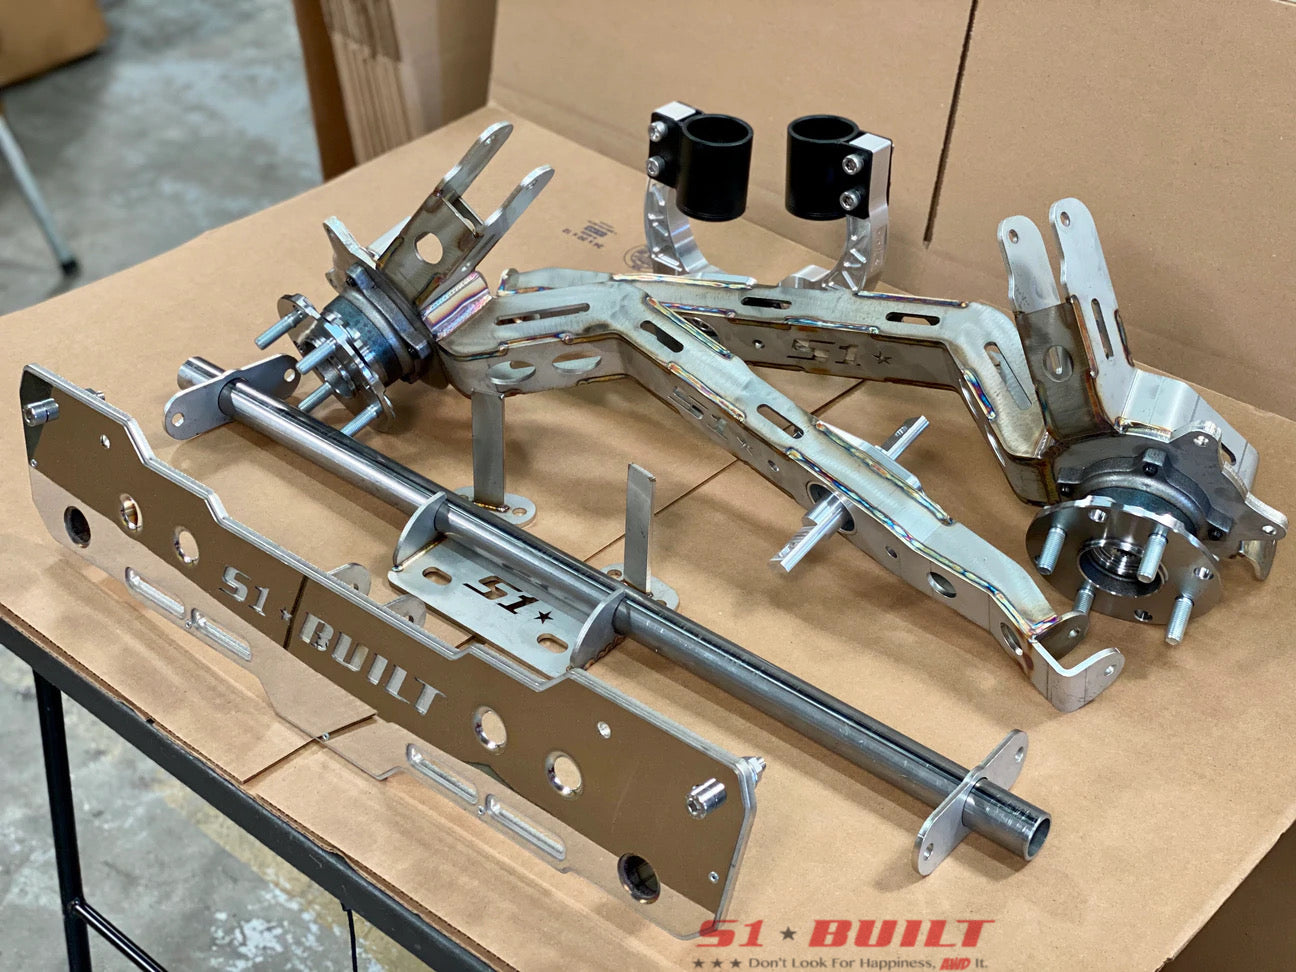 S1 Built - AWD Conversion Bundle: Alpha6 AWD/RWD/FWD Rear Trailing Arms with Delta7 Rear Diff Mount Kit and Billet Forks